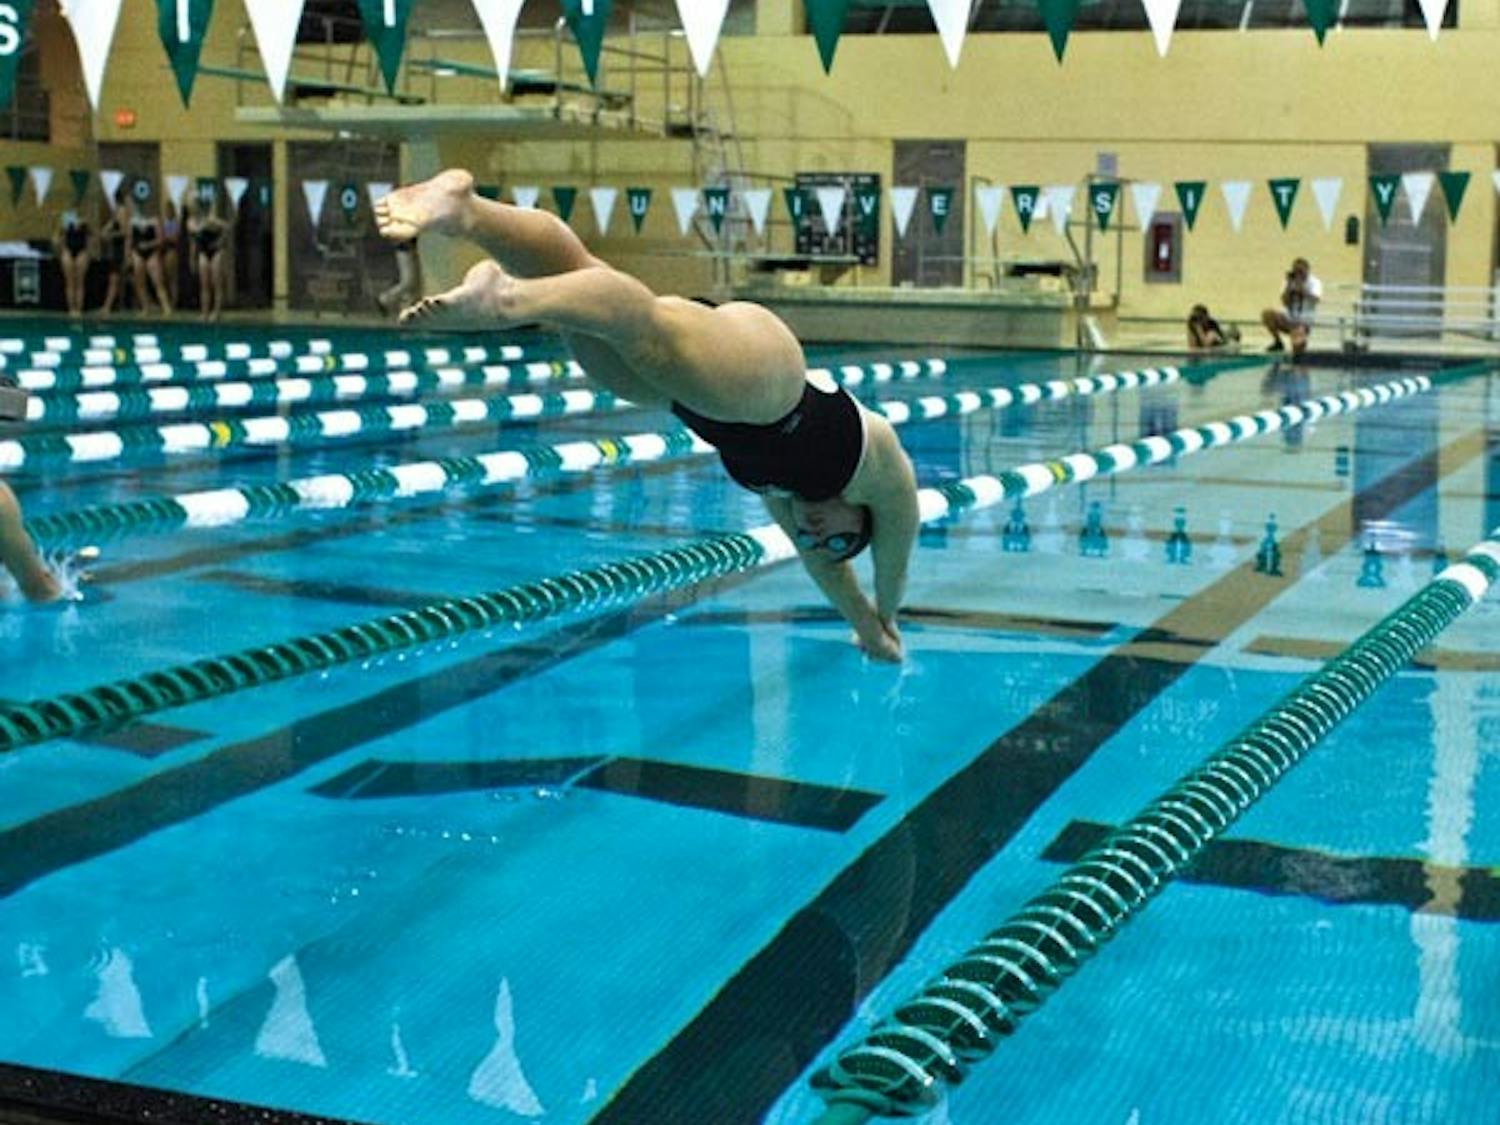 Swimming & Diving: Ohio moves on after initial losses to dominate three-day invitational  